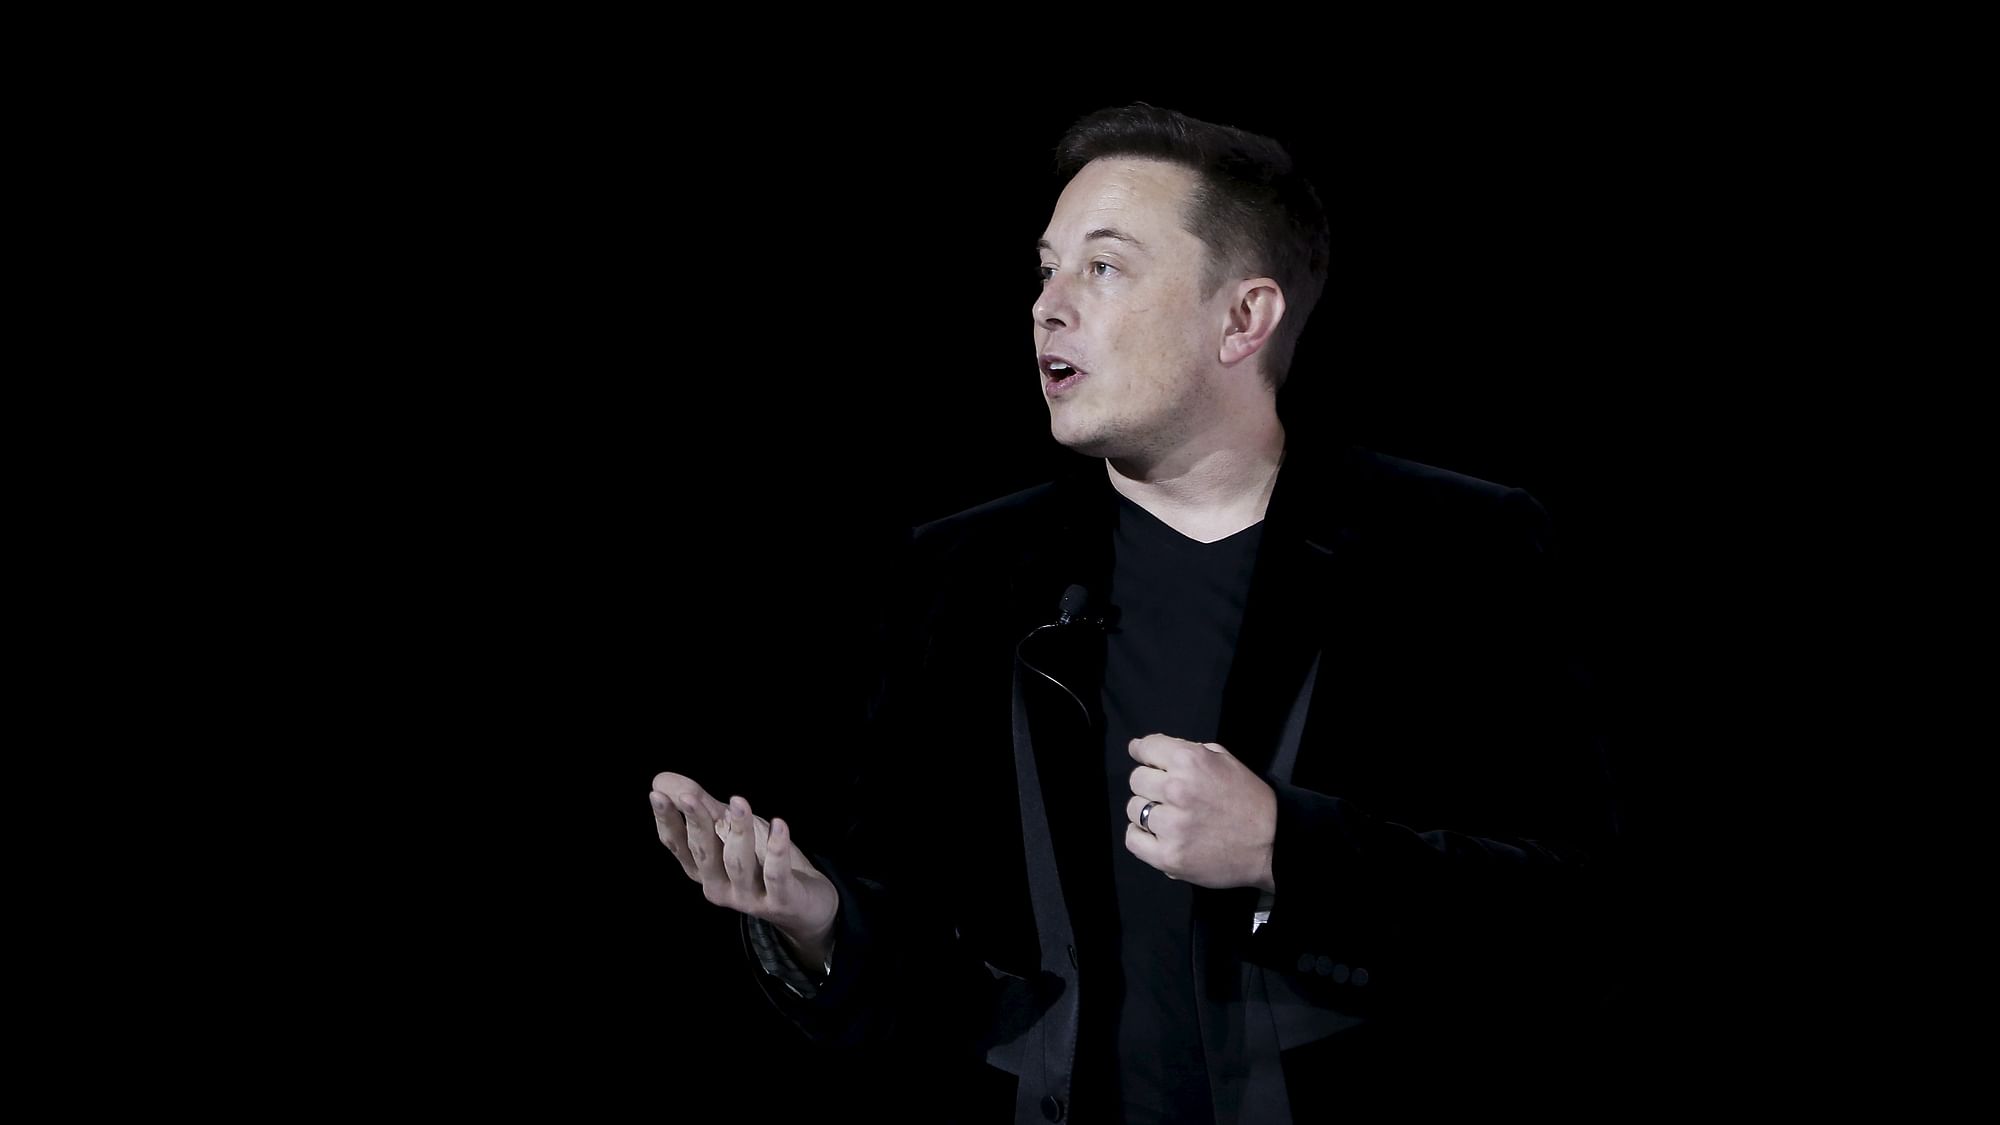 Musk had earlier warned of the harm that may come from artificial intelligence calling it humanity’s “biggest existential threat.” (Photo: Reuters)